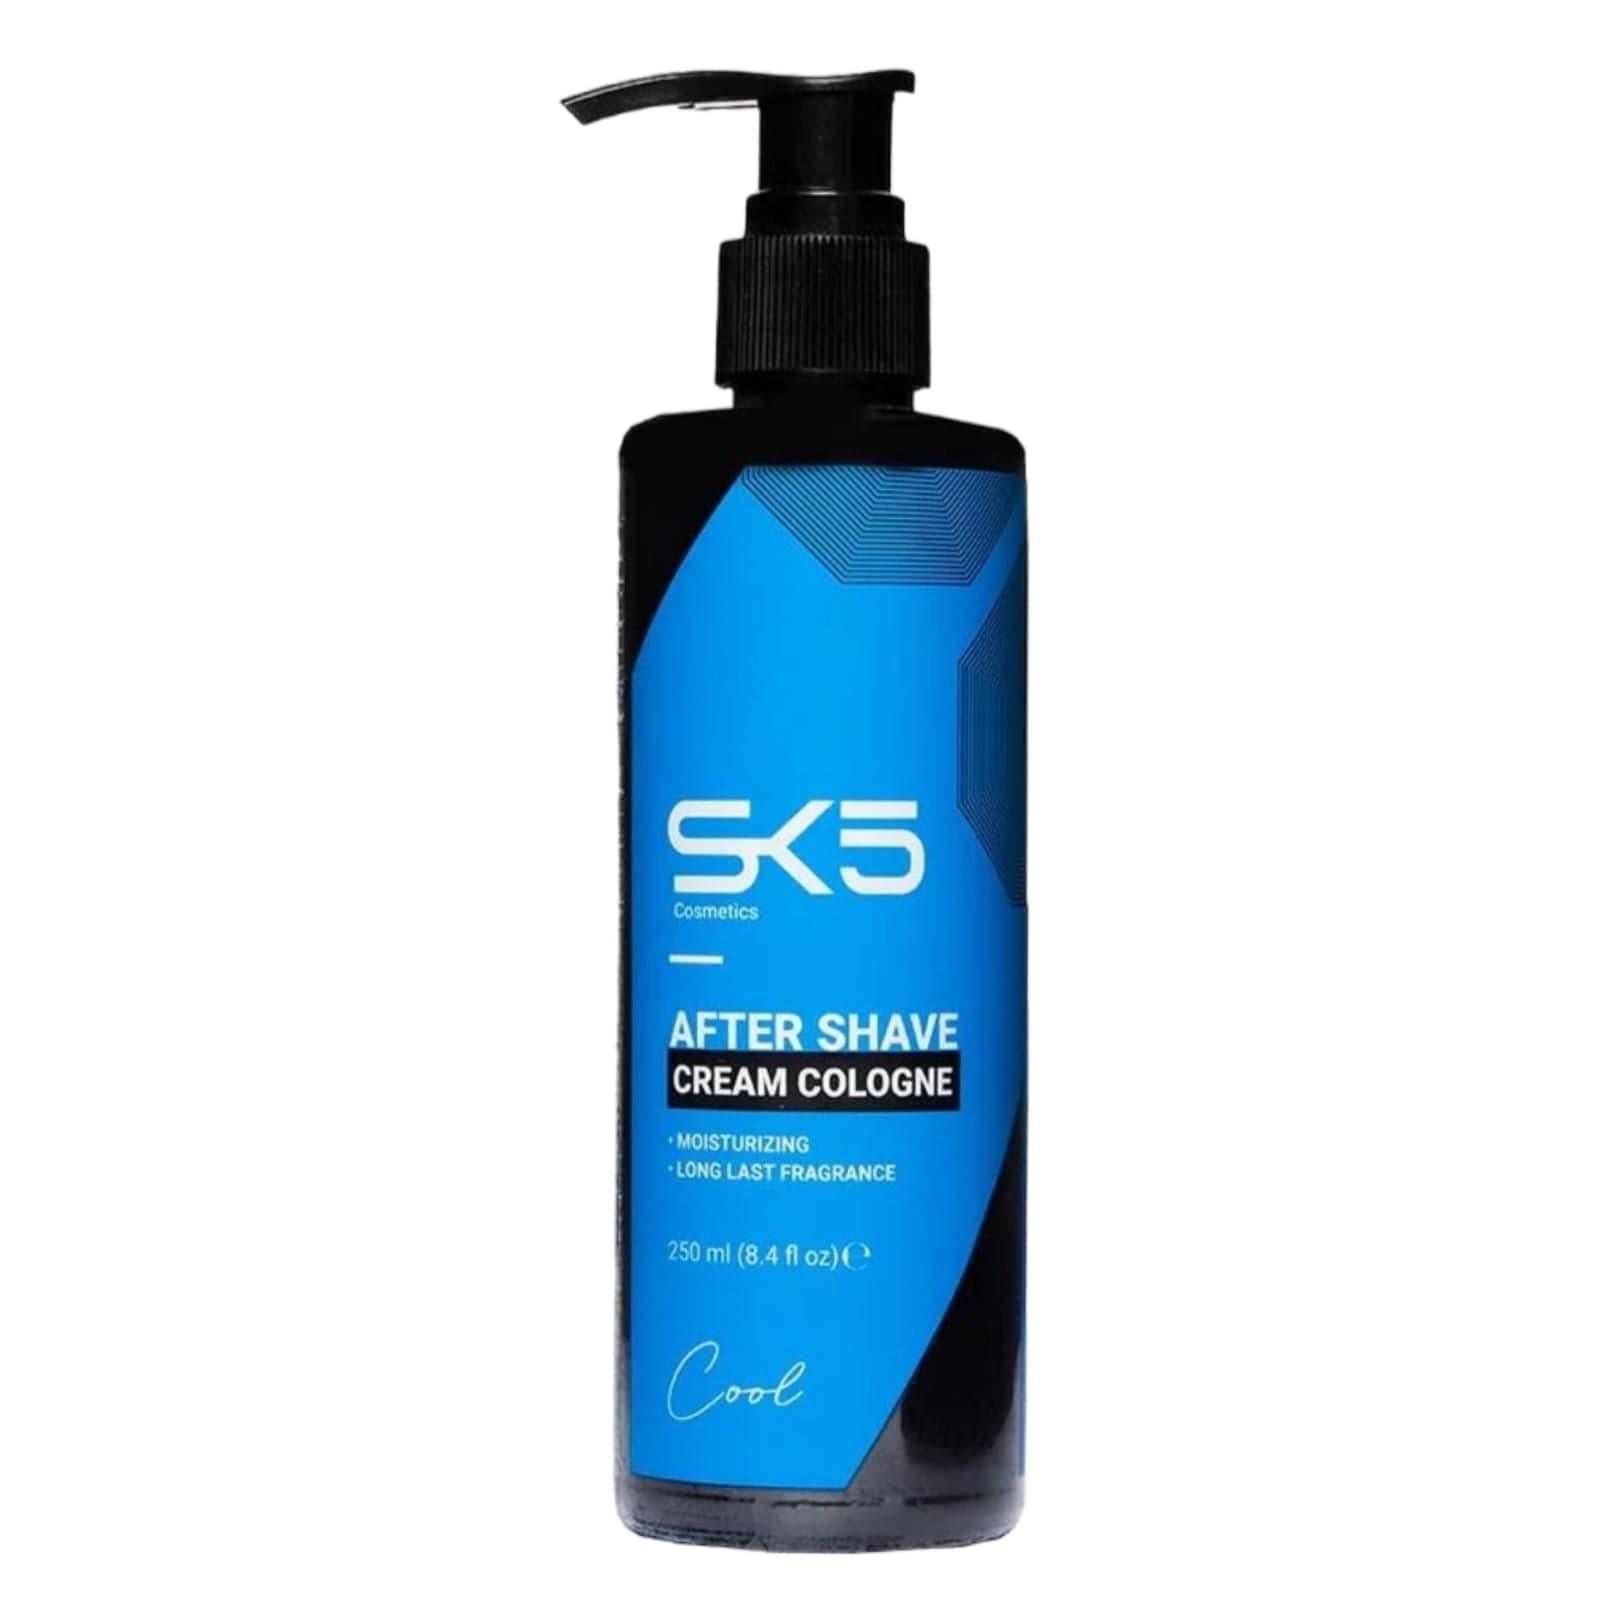 SK5 After Shave Cream Cologne Cool 250ml